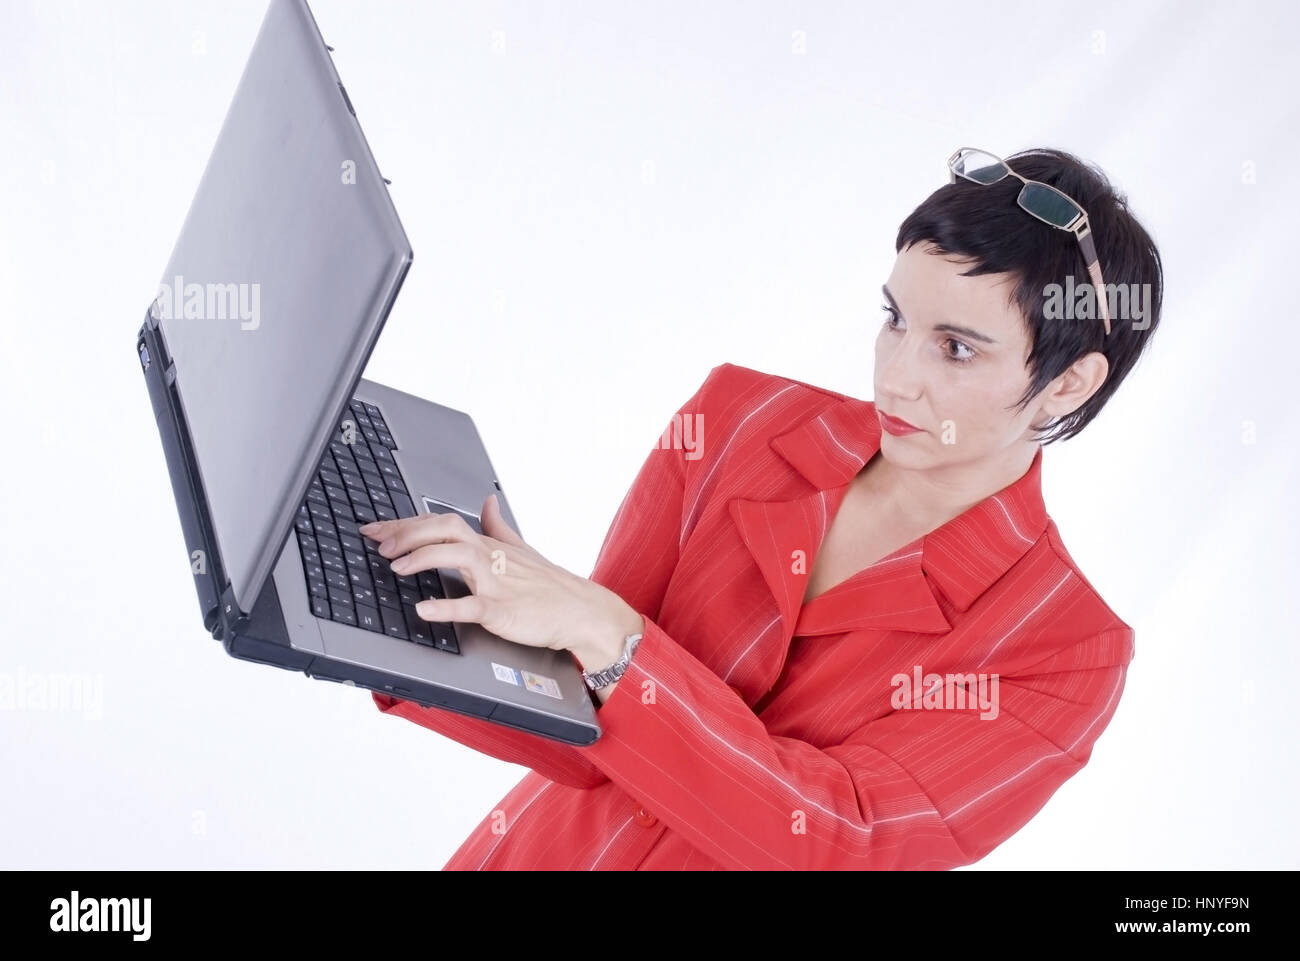 Model release , Businessfrau mit Laptop - business woman with laptop Stock Photo